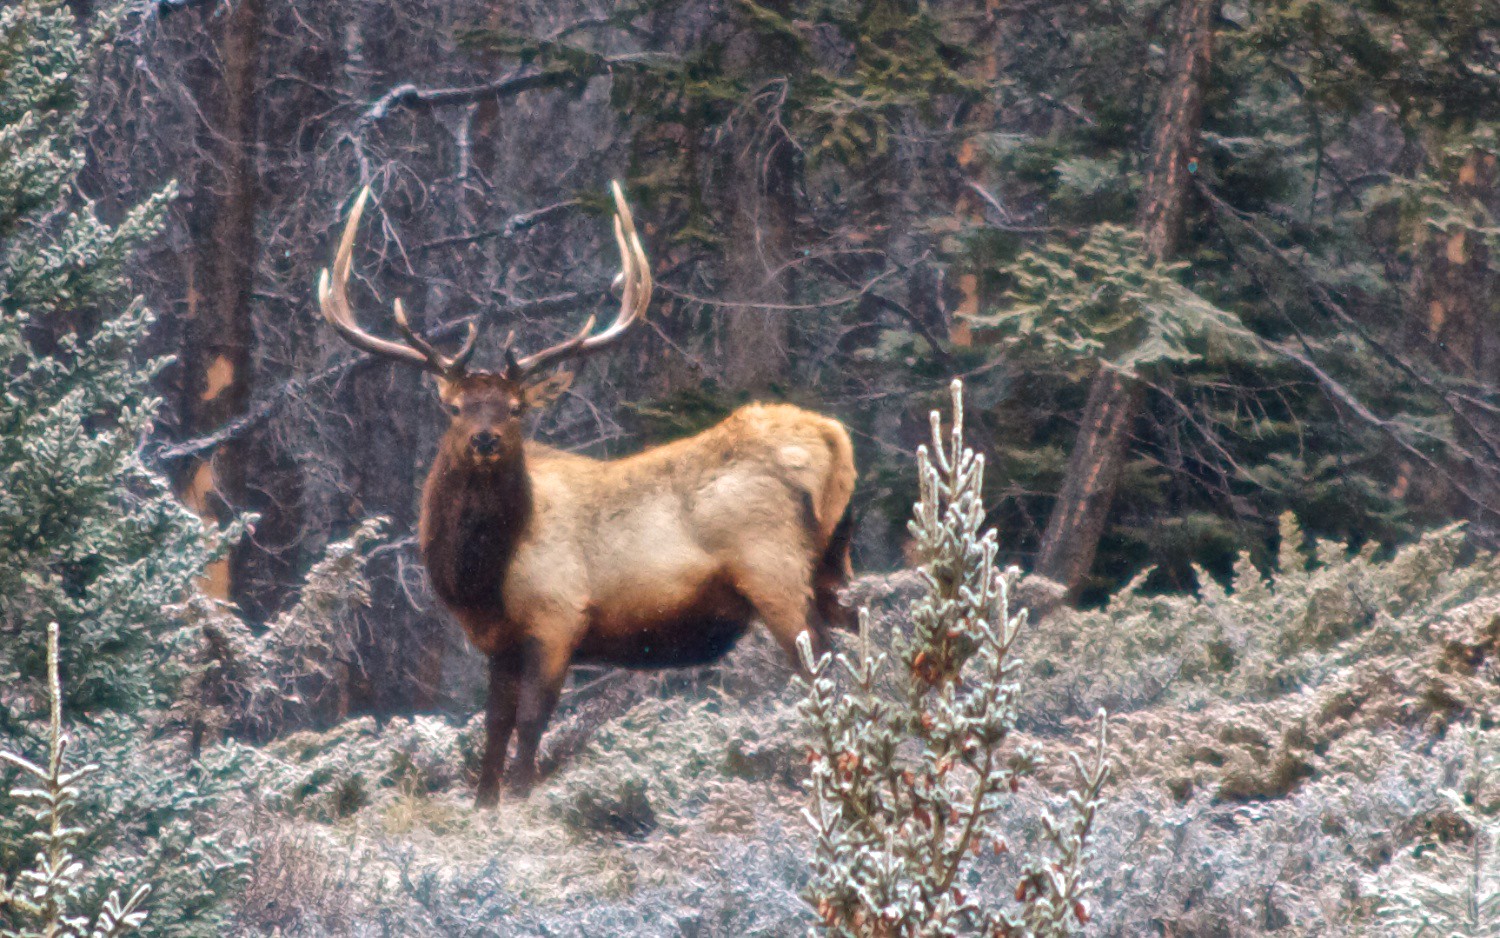 A thin quilt of frost on ground and tress. A stag with a majestic crown of horns, head turned to look you in the eyes